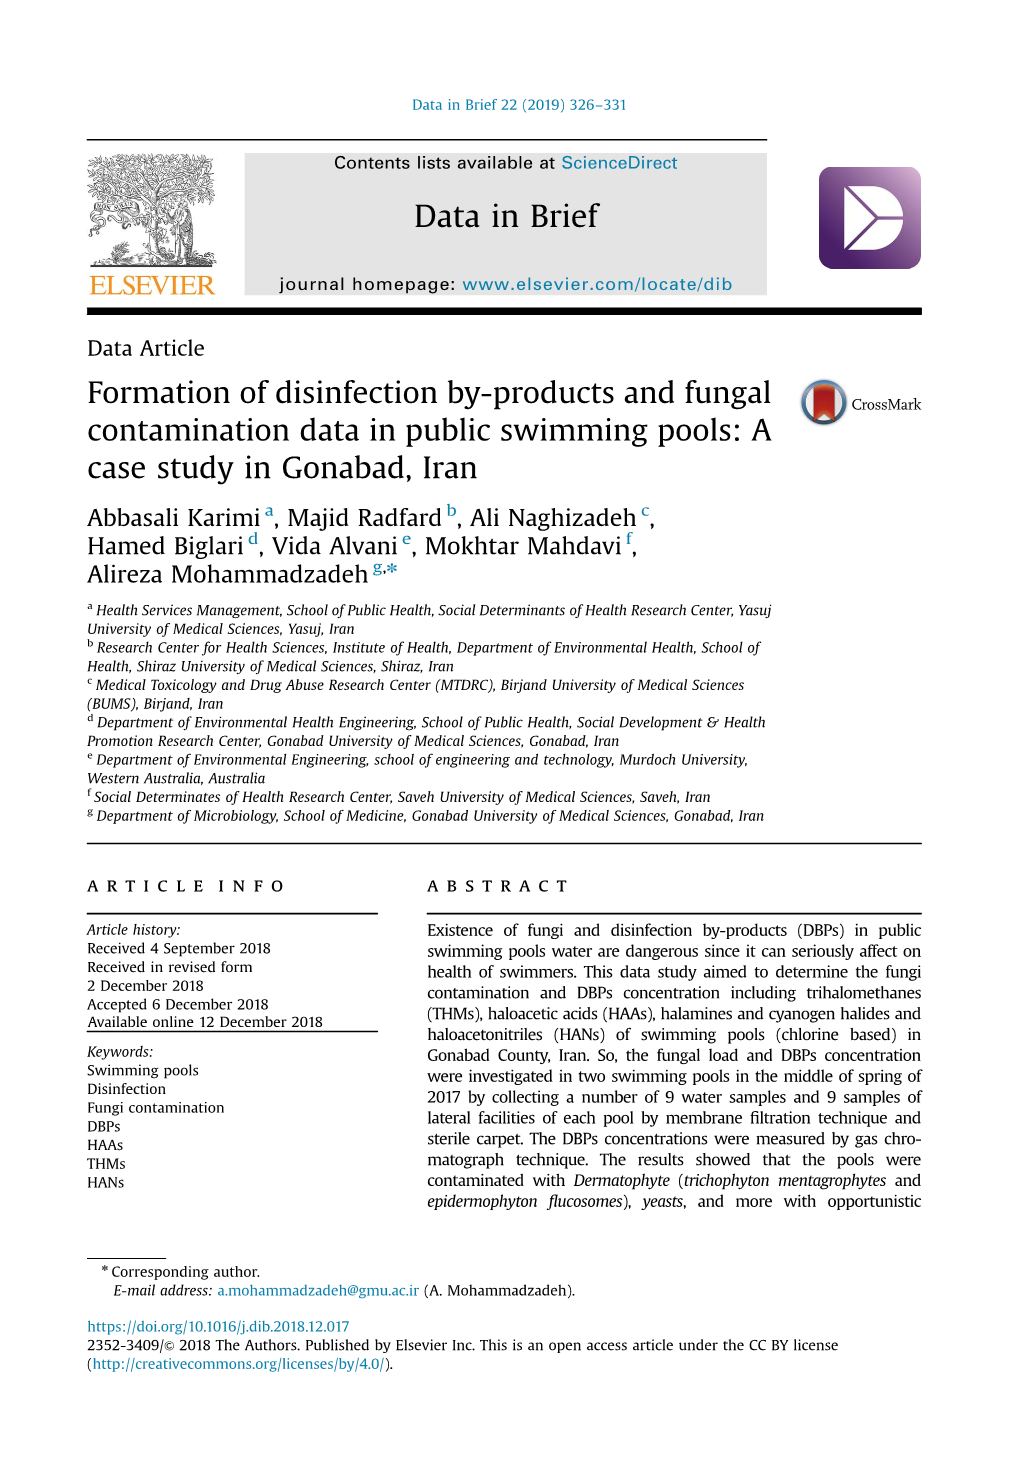 Formation of Disinfection By-Products and Fungal Contamination Data in Public Swimming Pools: a Case Study in Gonabad, Iran